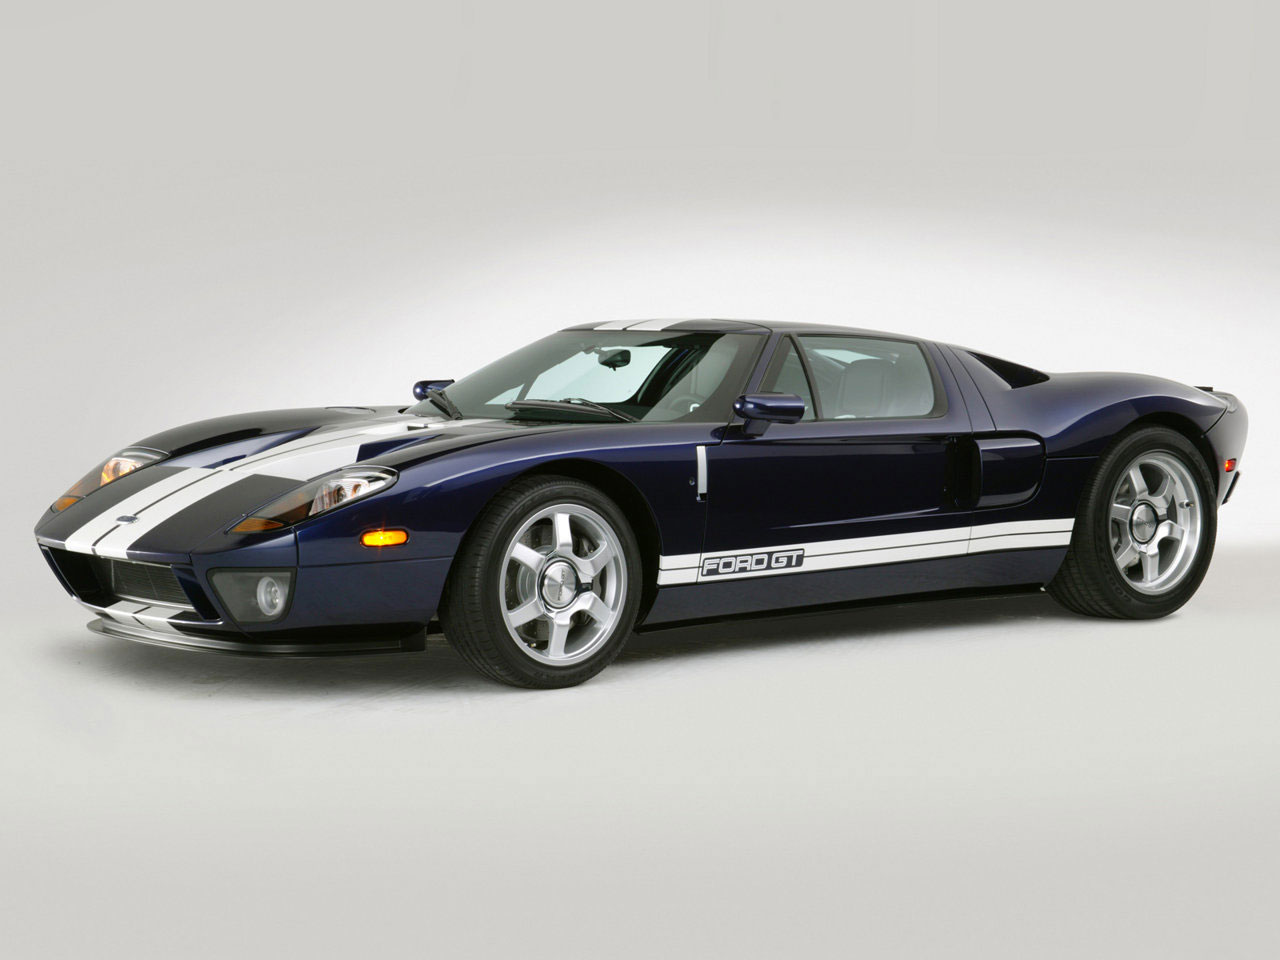 Gallery Ford Gt Wallpaper